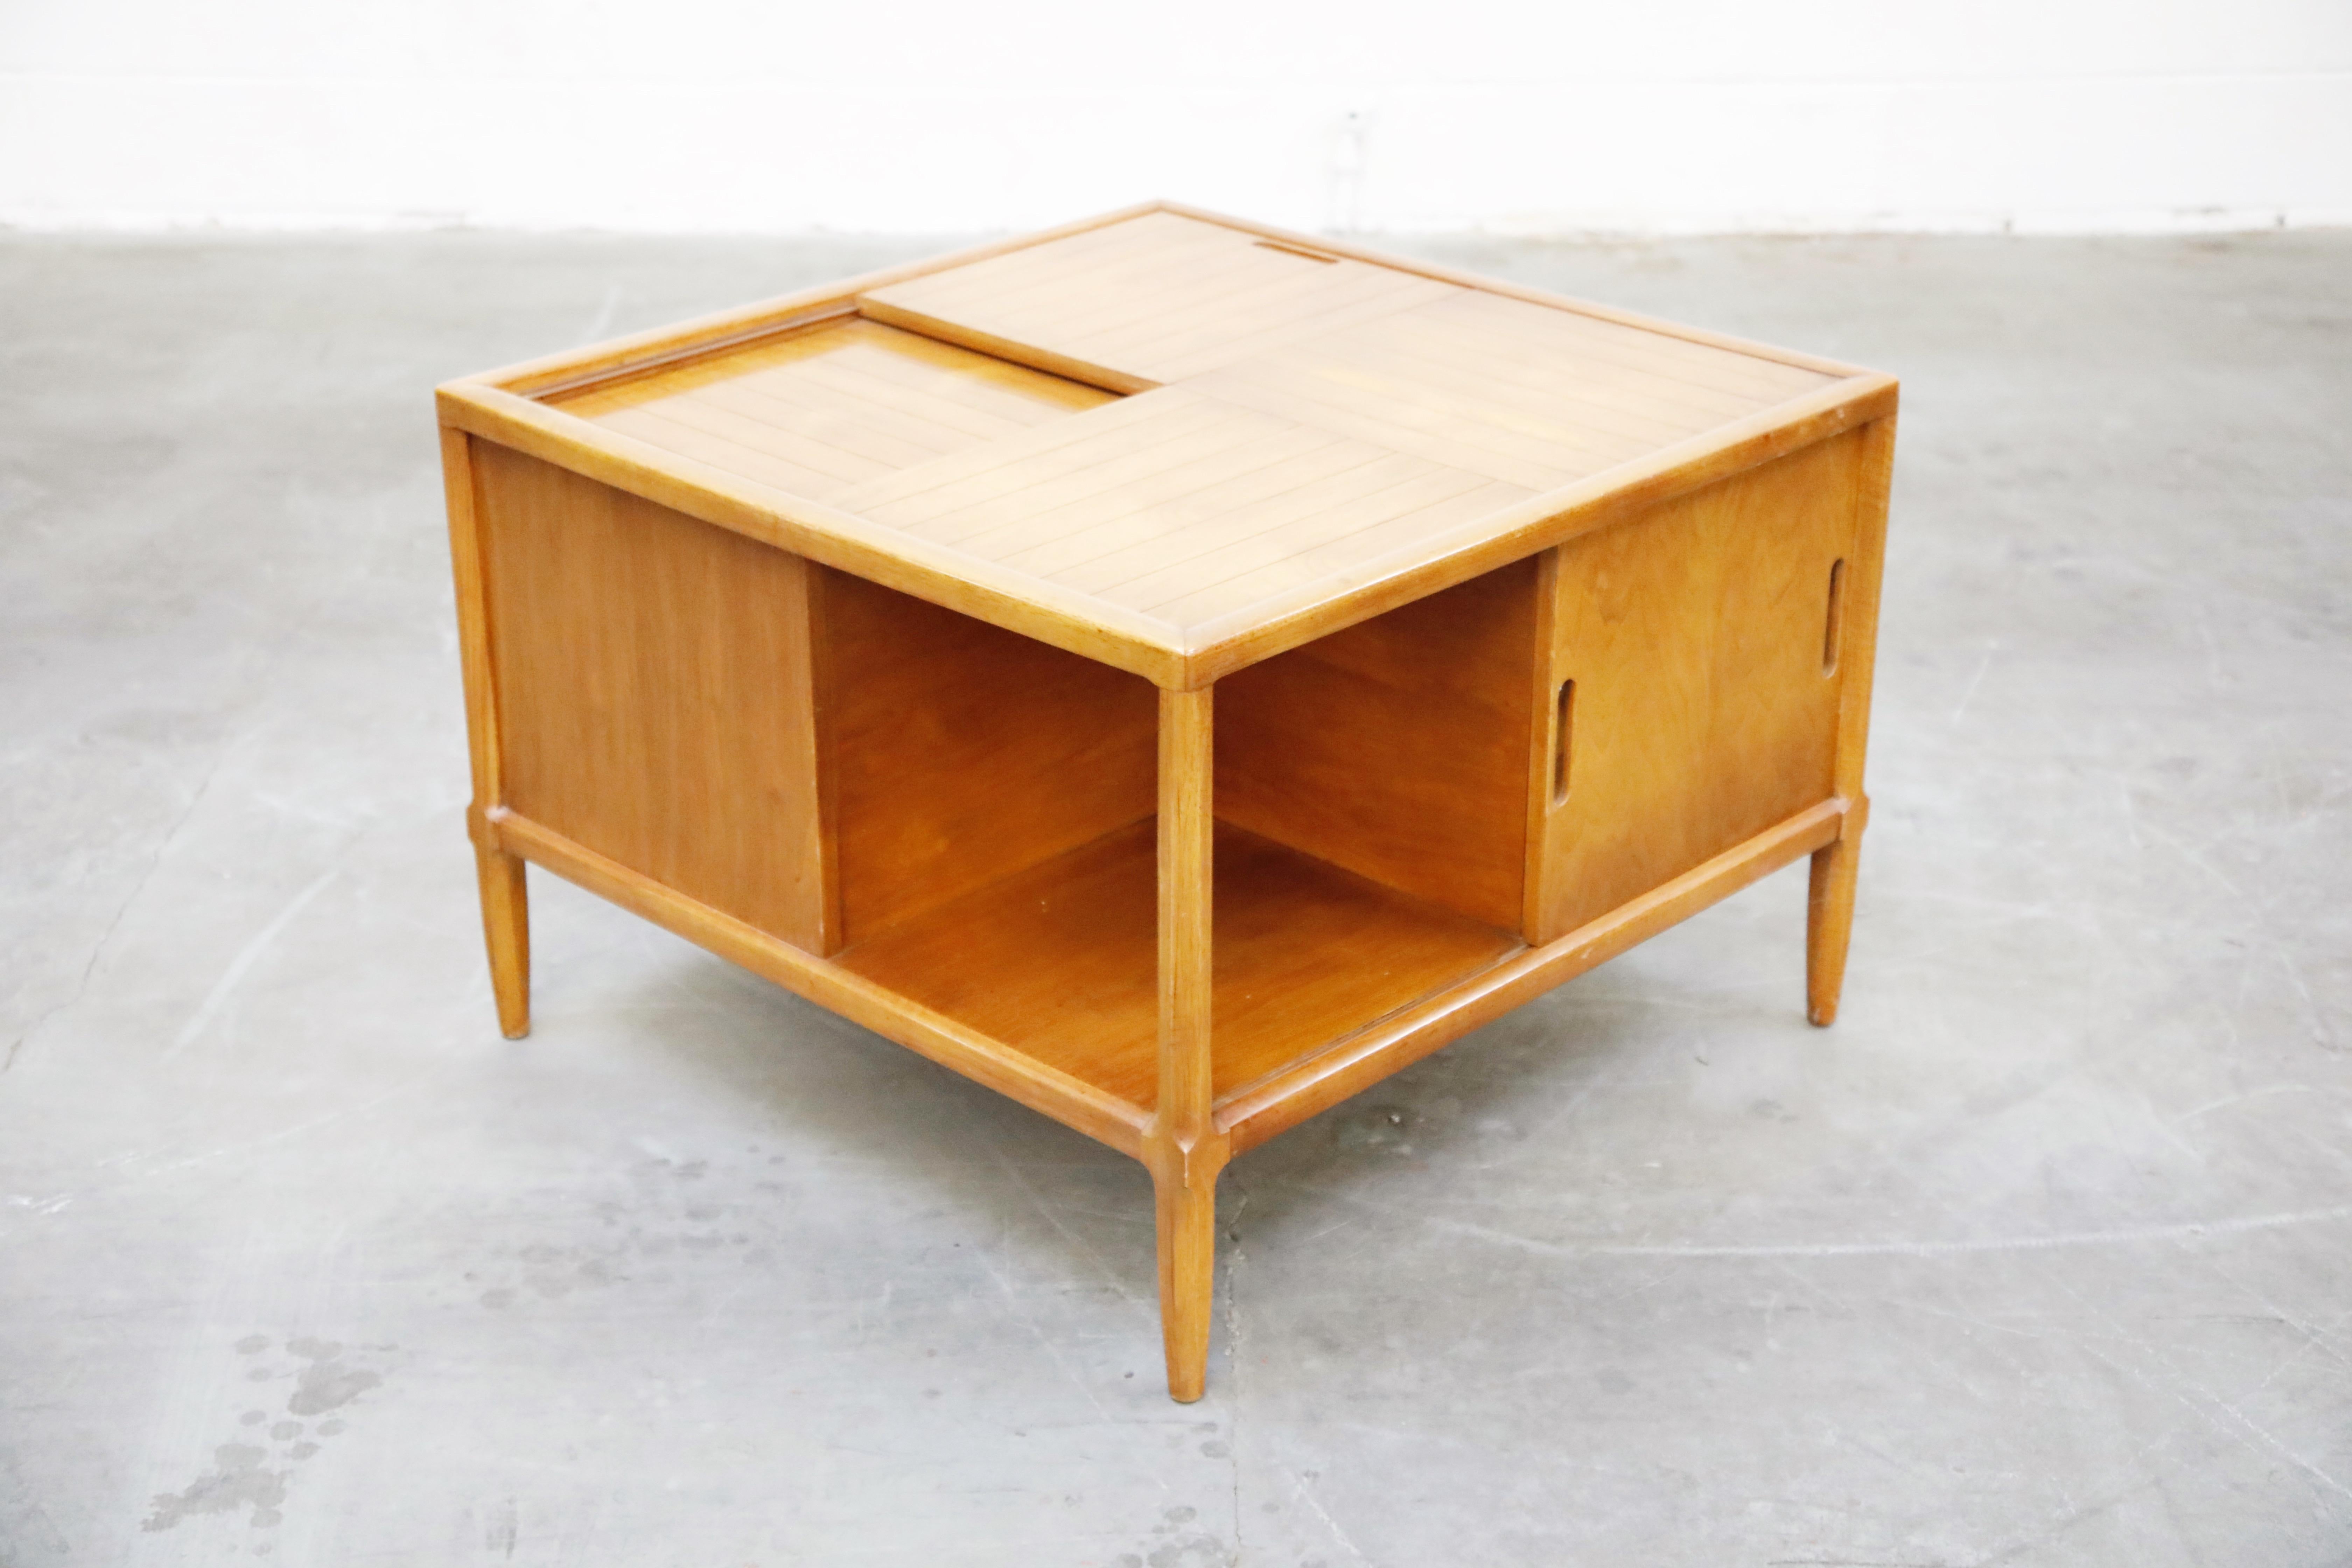 American Tomlinson Sophisticate Cocktail Bar and Storage Coffee Table, 1950s, Signed